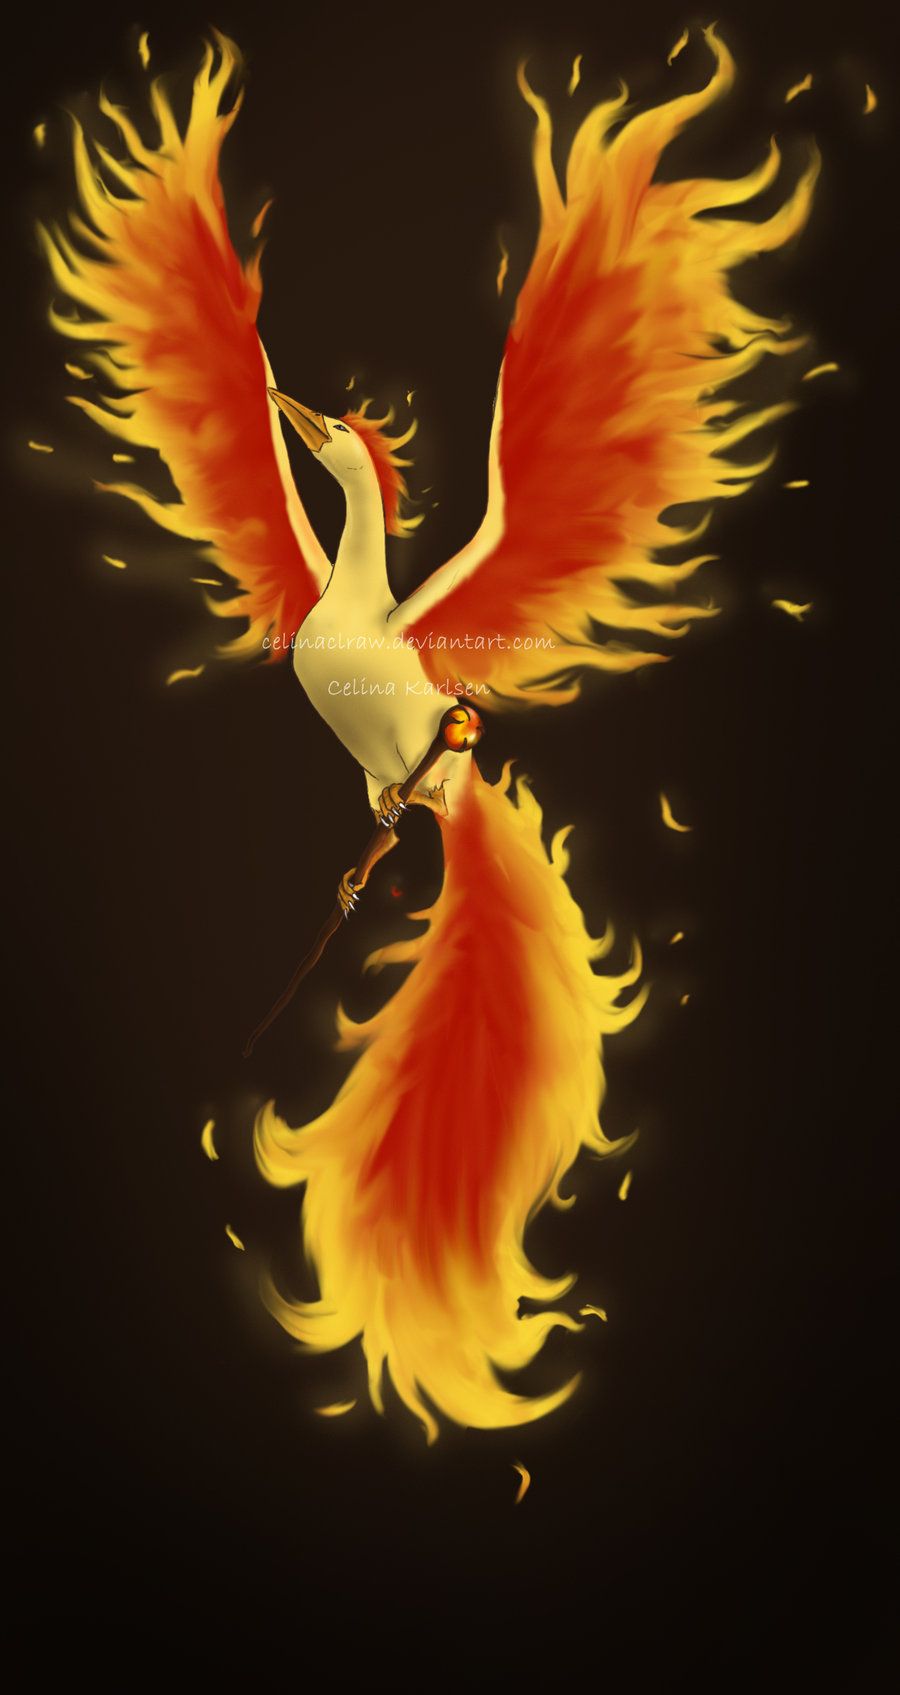 Moltres by celinaclraw on DeviantArt